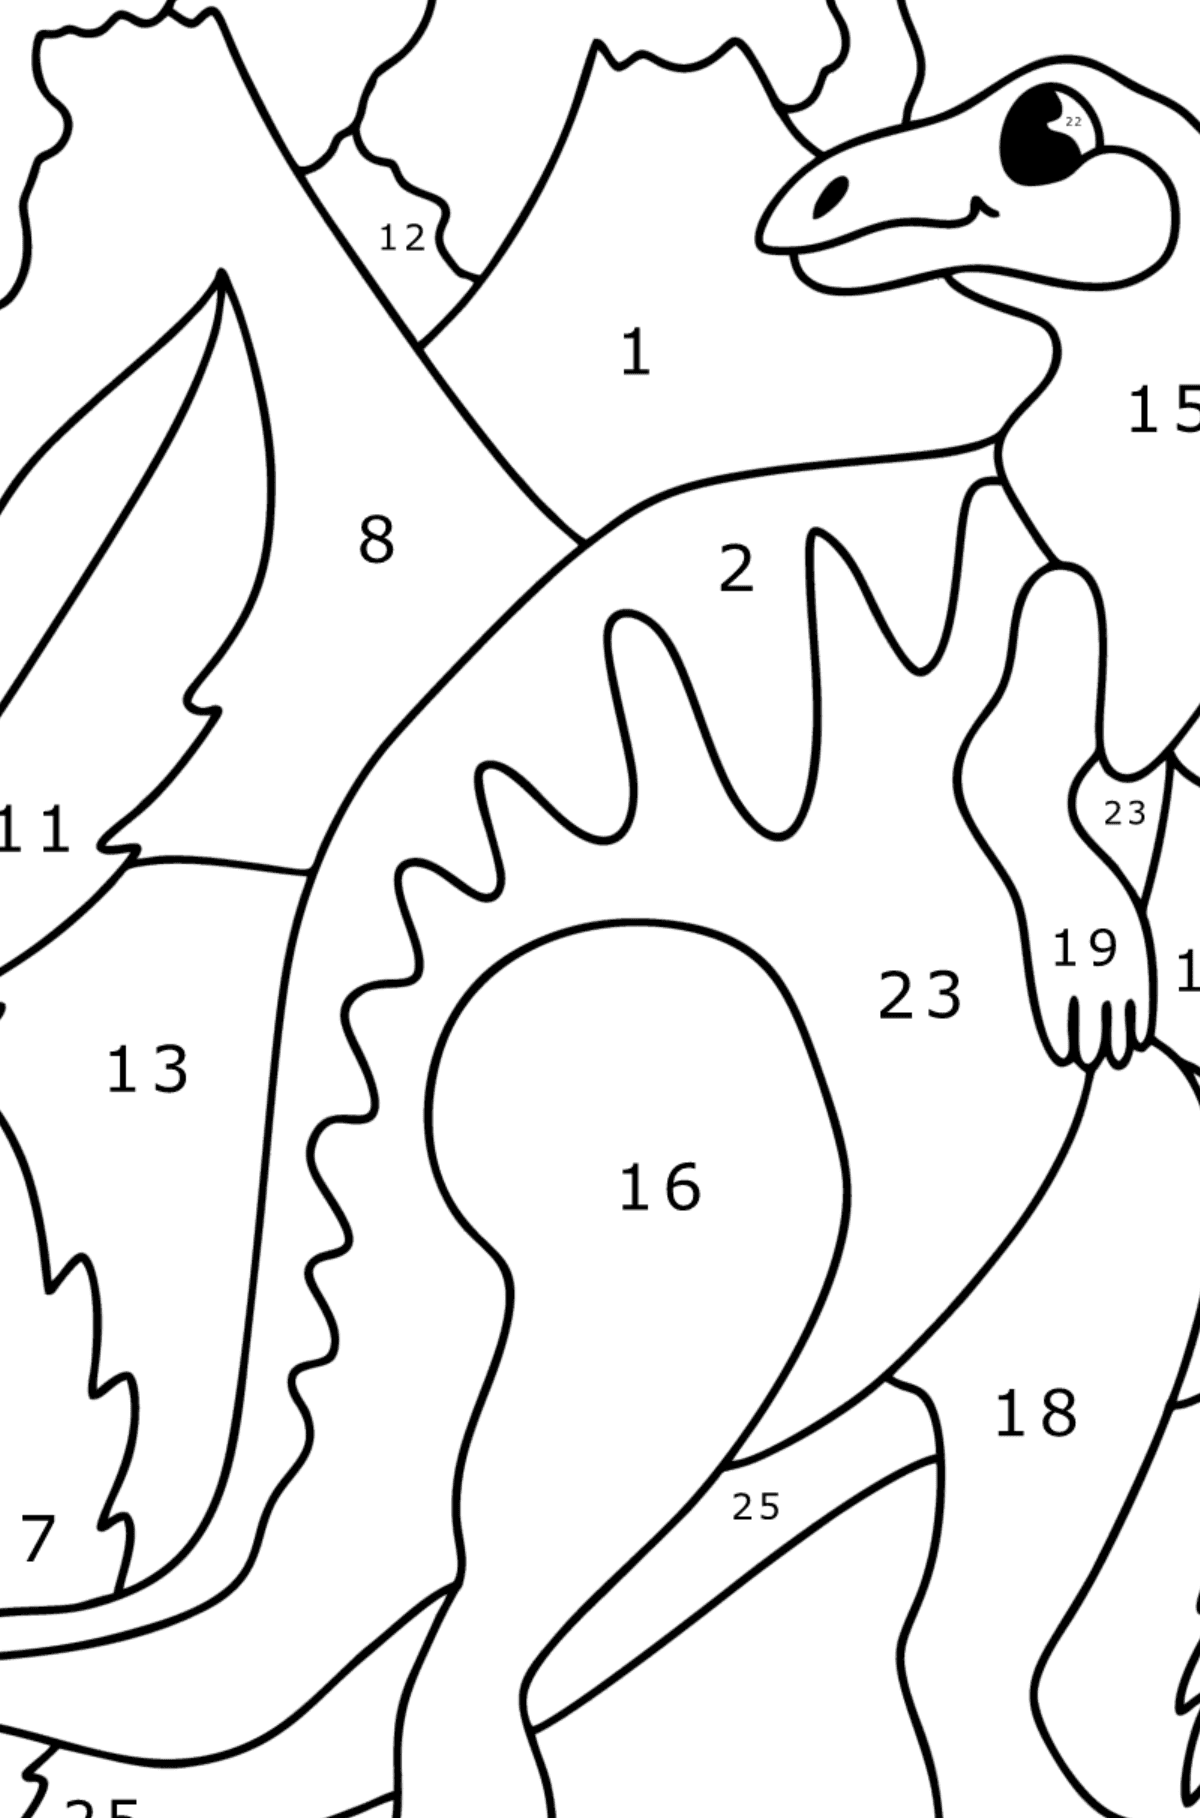 Hadrosaur coloring page - Coloring by Numbers for Kids